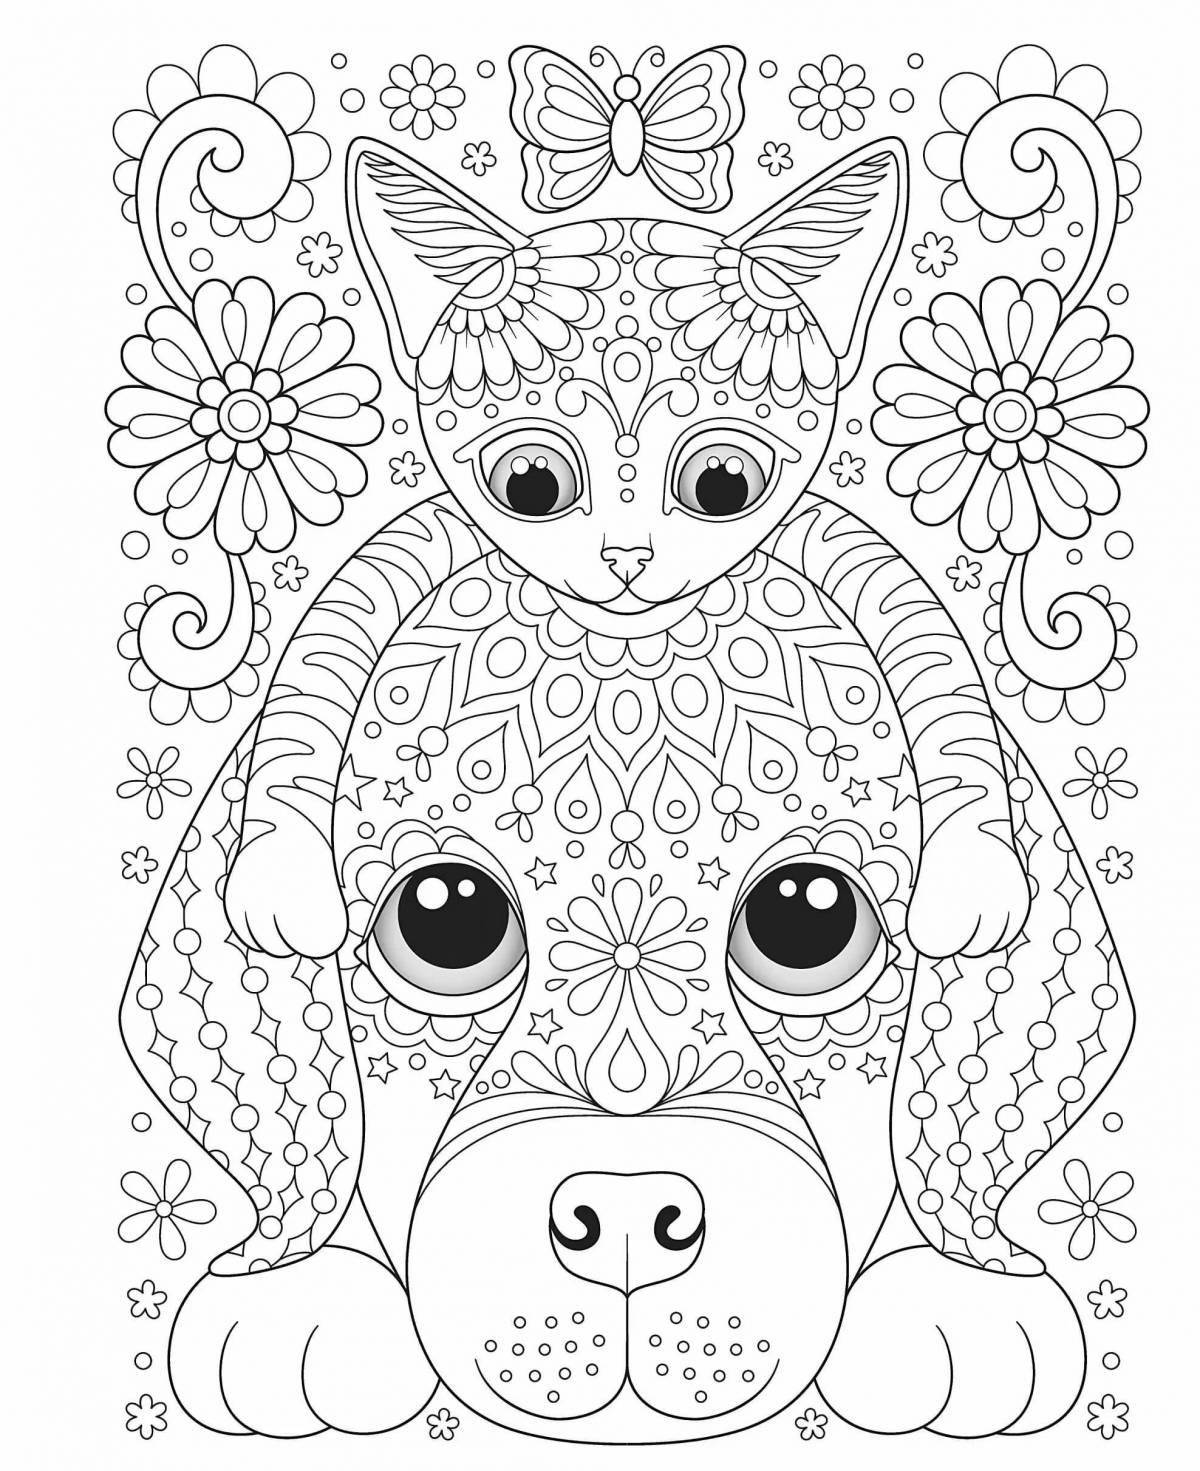 Wonderful anti-stress coloring book for girls 9-10 years old